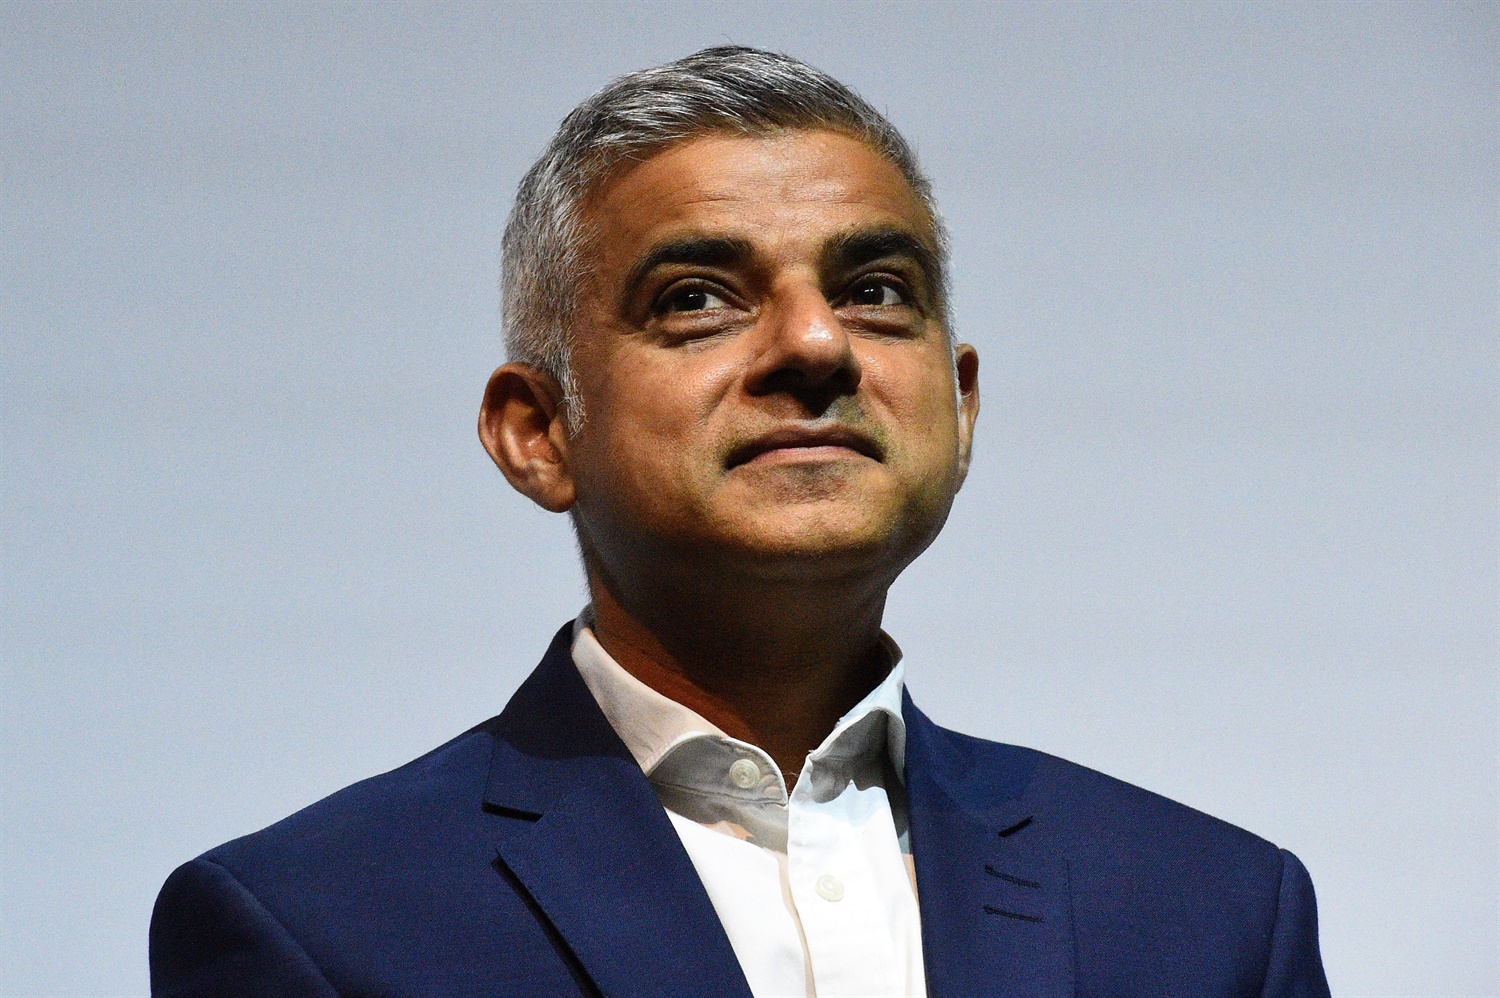 London mayor calls for government to devolve rail infrastructure powers and funding to TfL